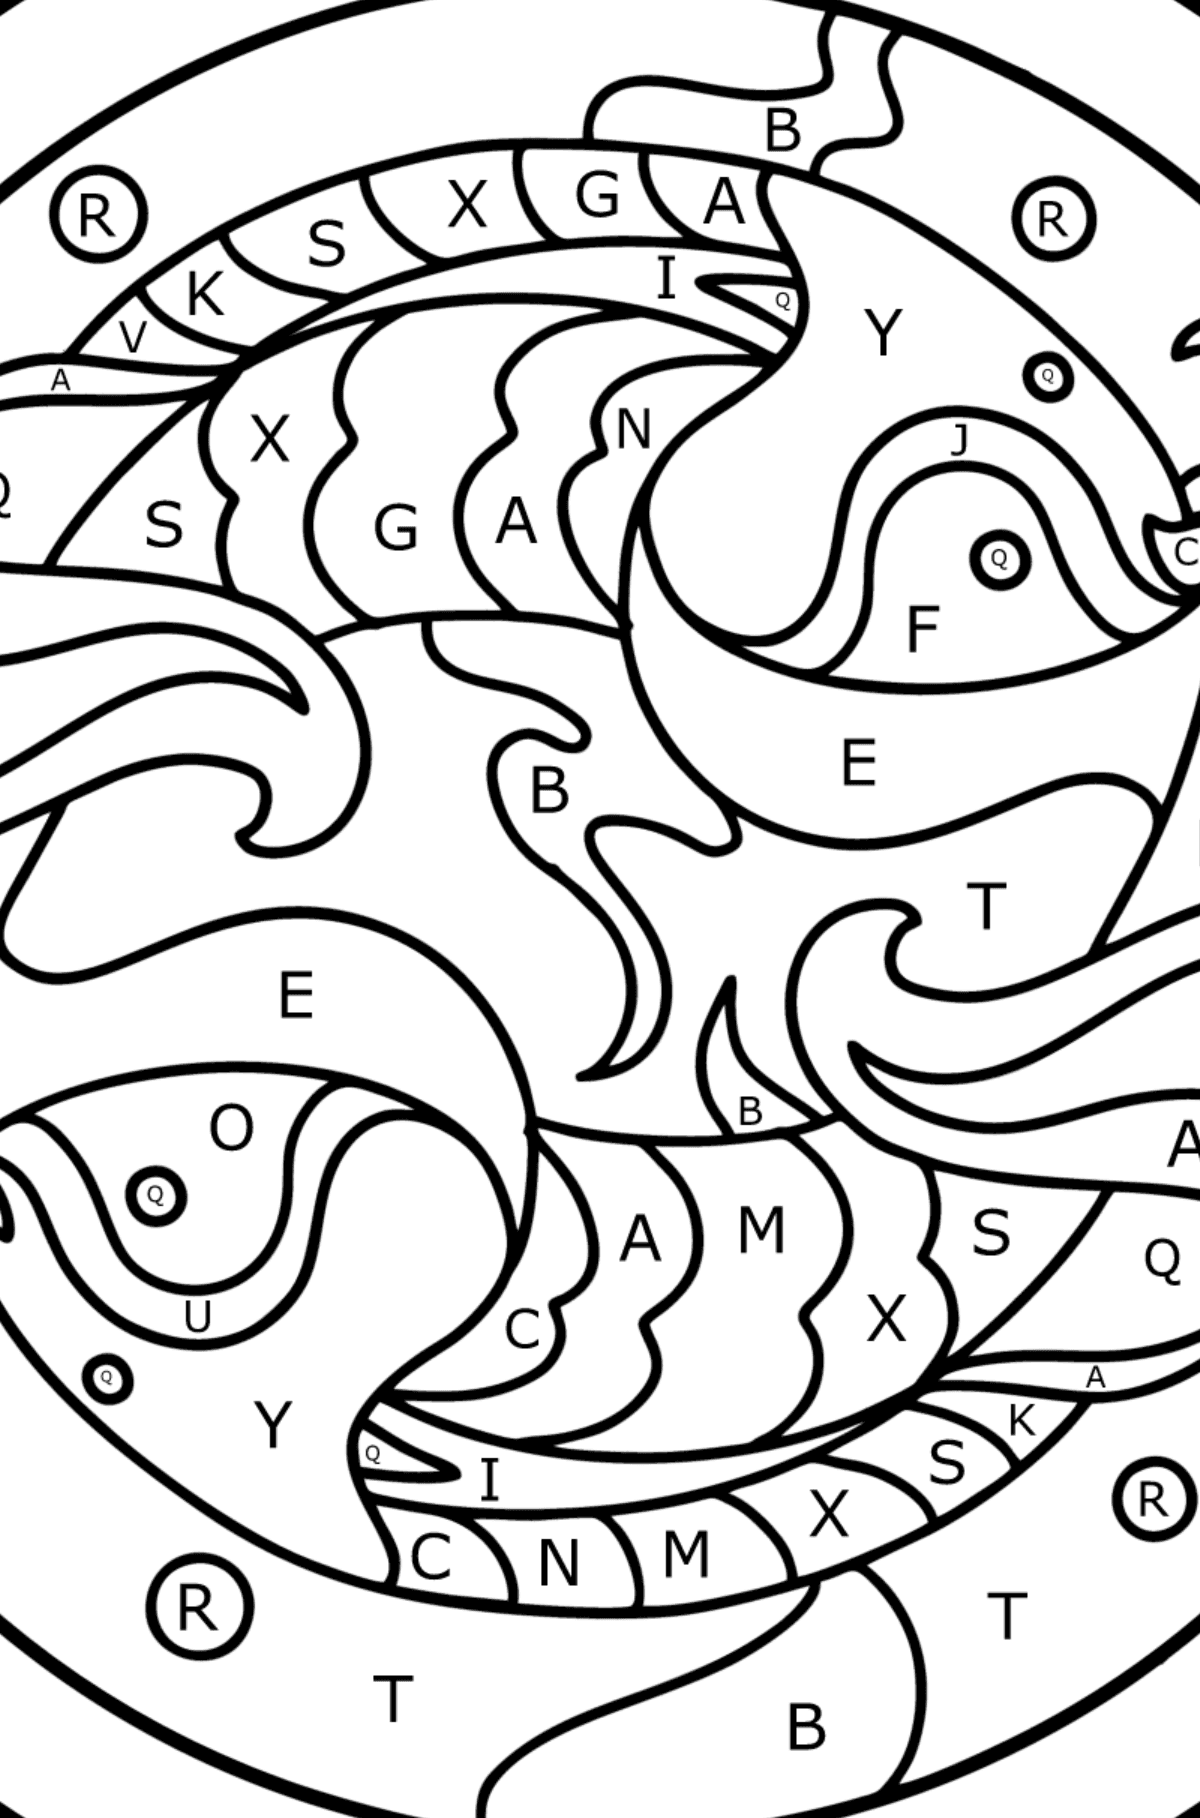 Coloring page for kids - zodiac sign Pisces - Coloring by Letters for Kids